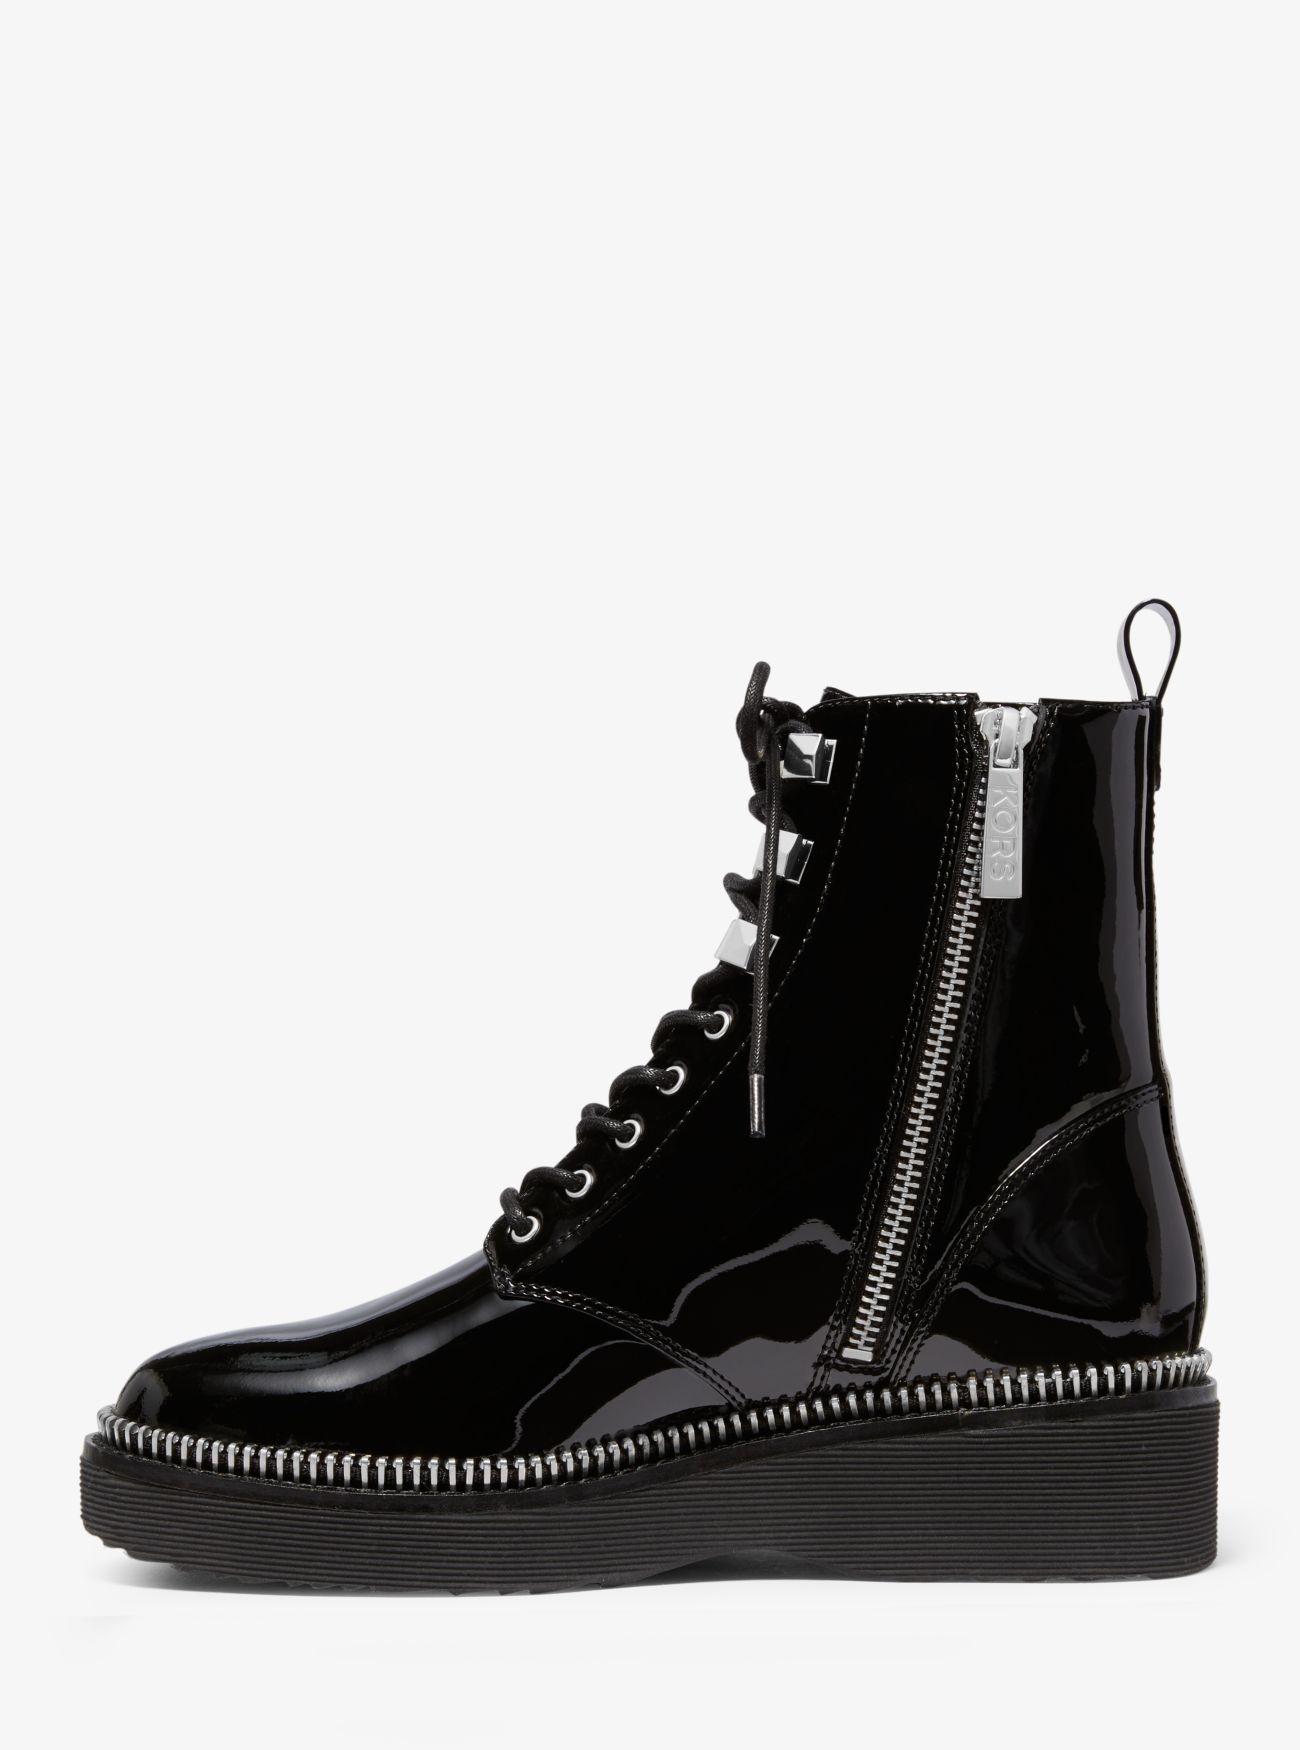 MICHAEL Michael Kors Haskell Patent Leather Combat Boot in Black - Lyst